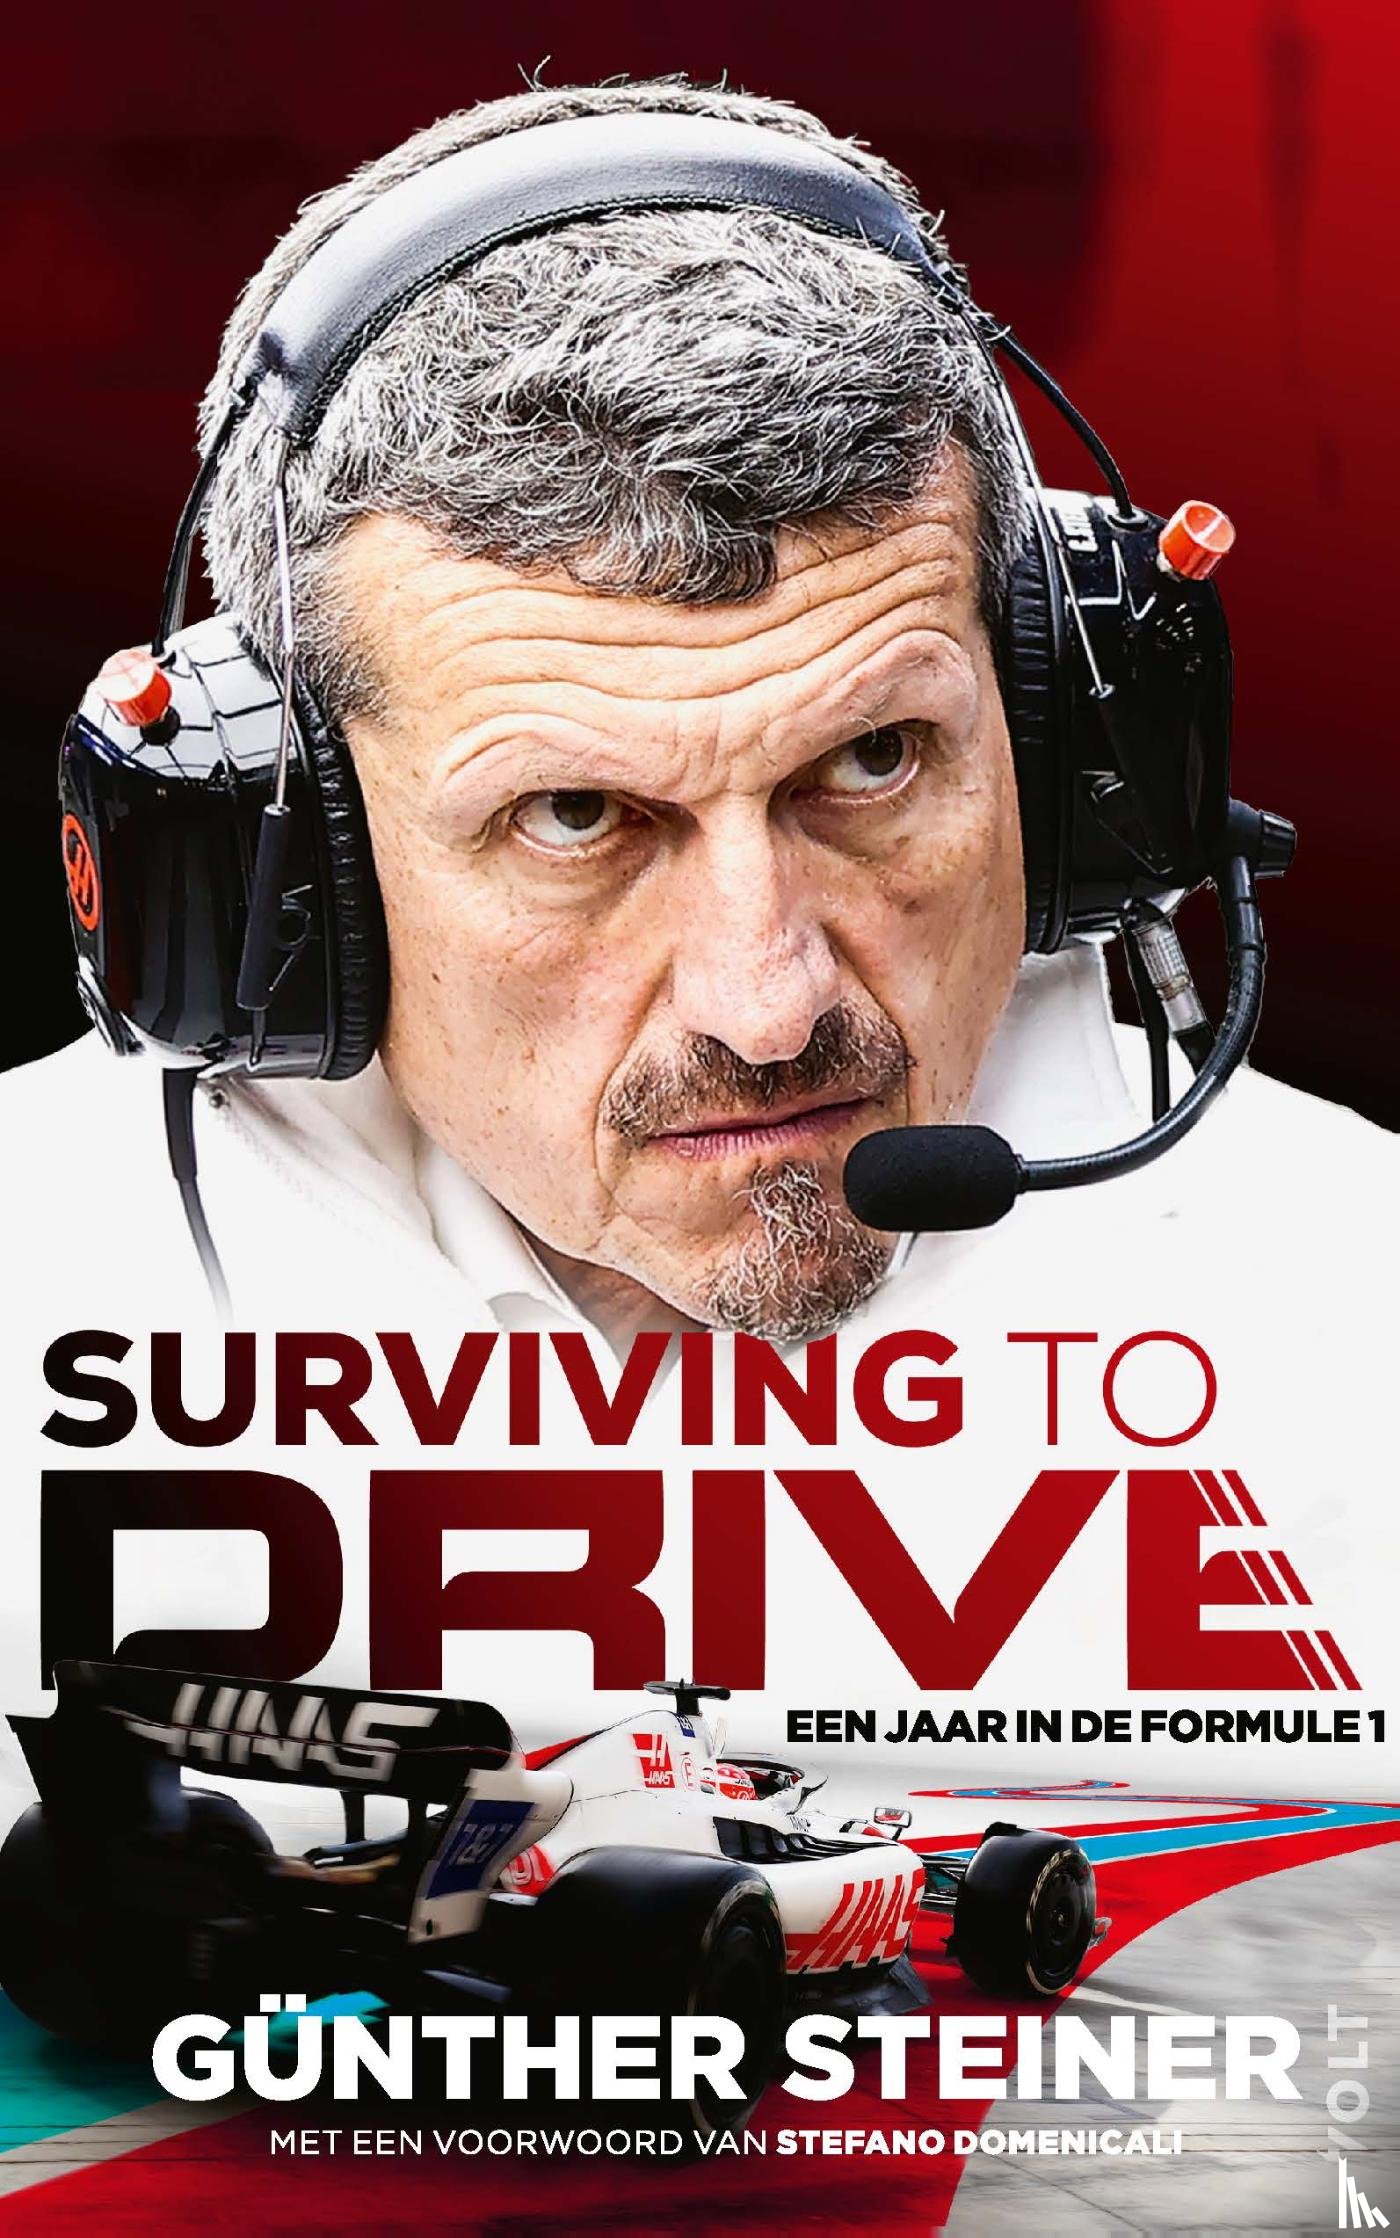 Steiner, Guenther - Surviving to Drive (NL editie)